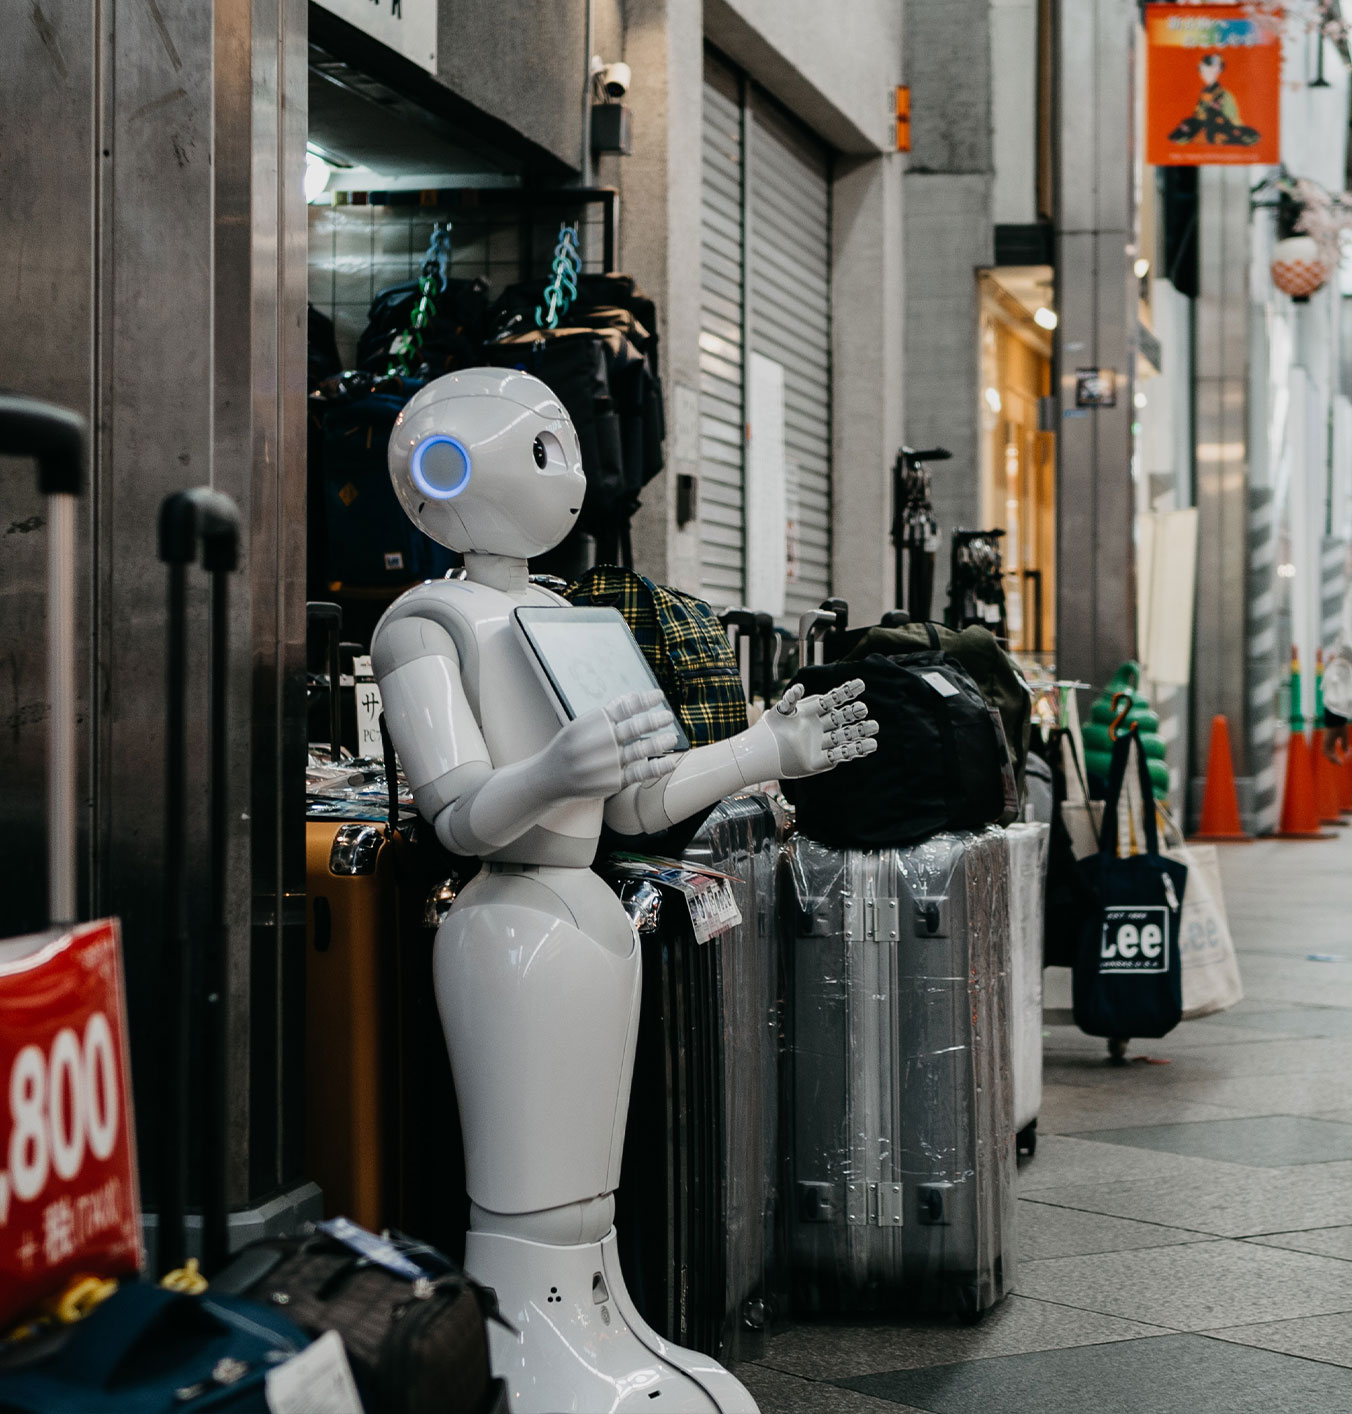 5 ways AI and robots will affect future travel